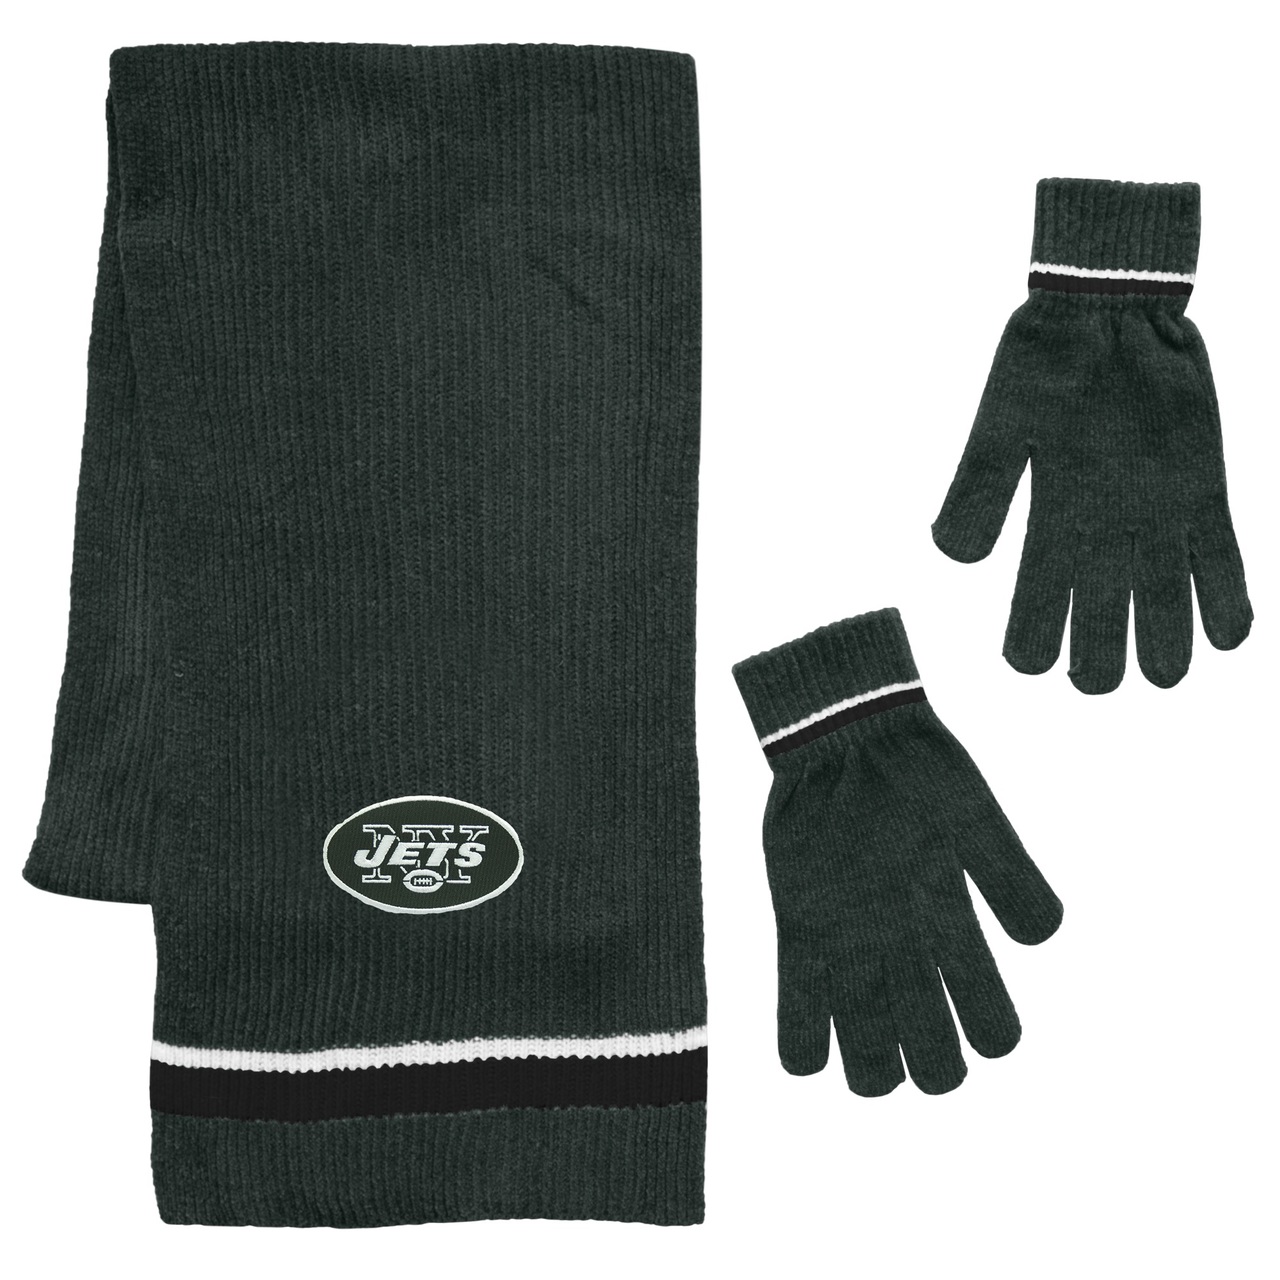 New York Jets Scarf and Glove Gift Set Chenille